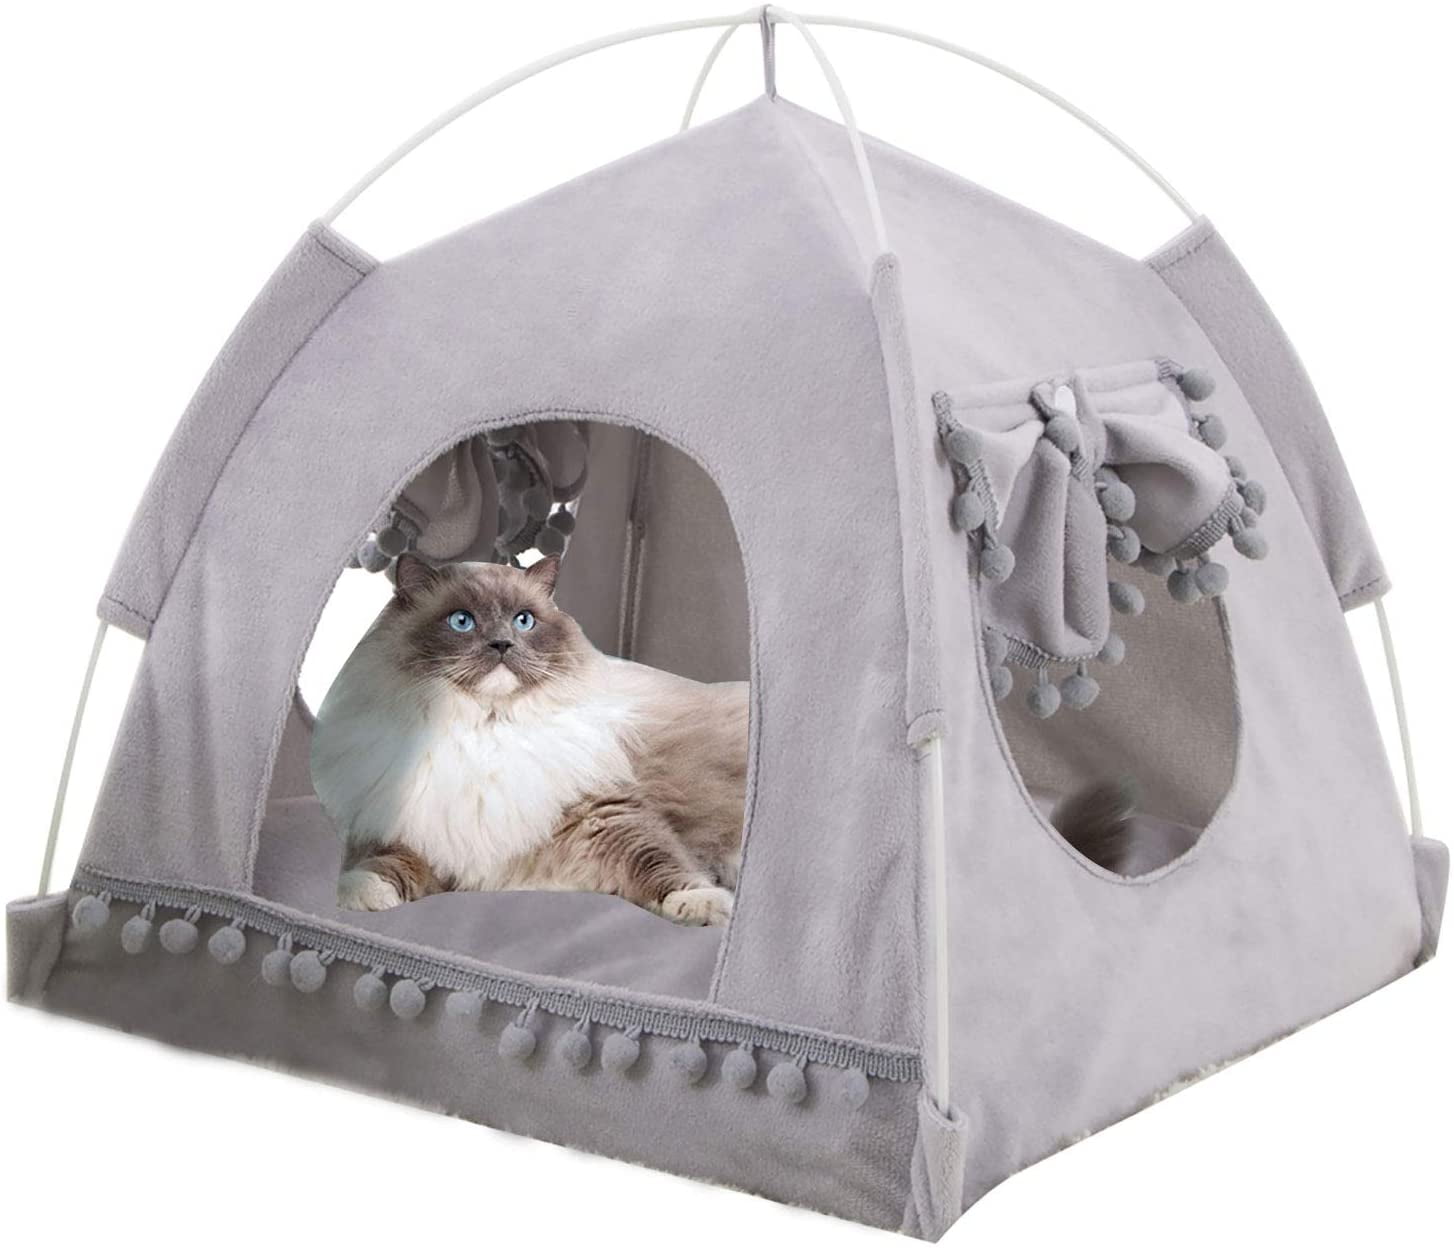 Creative Self-Warming Comfortable Triangle Cat Caver Bed Pet Tent Soft House US 